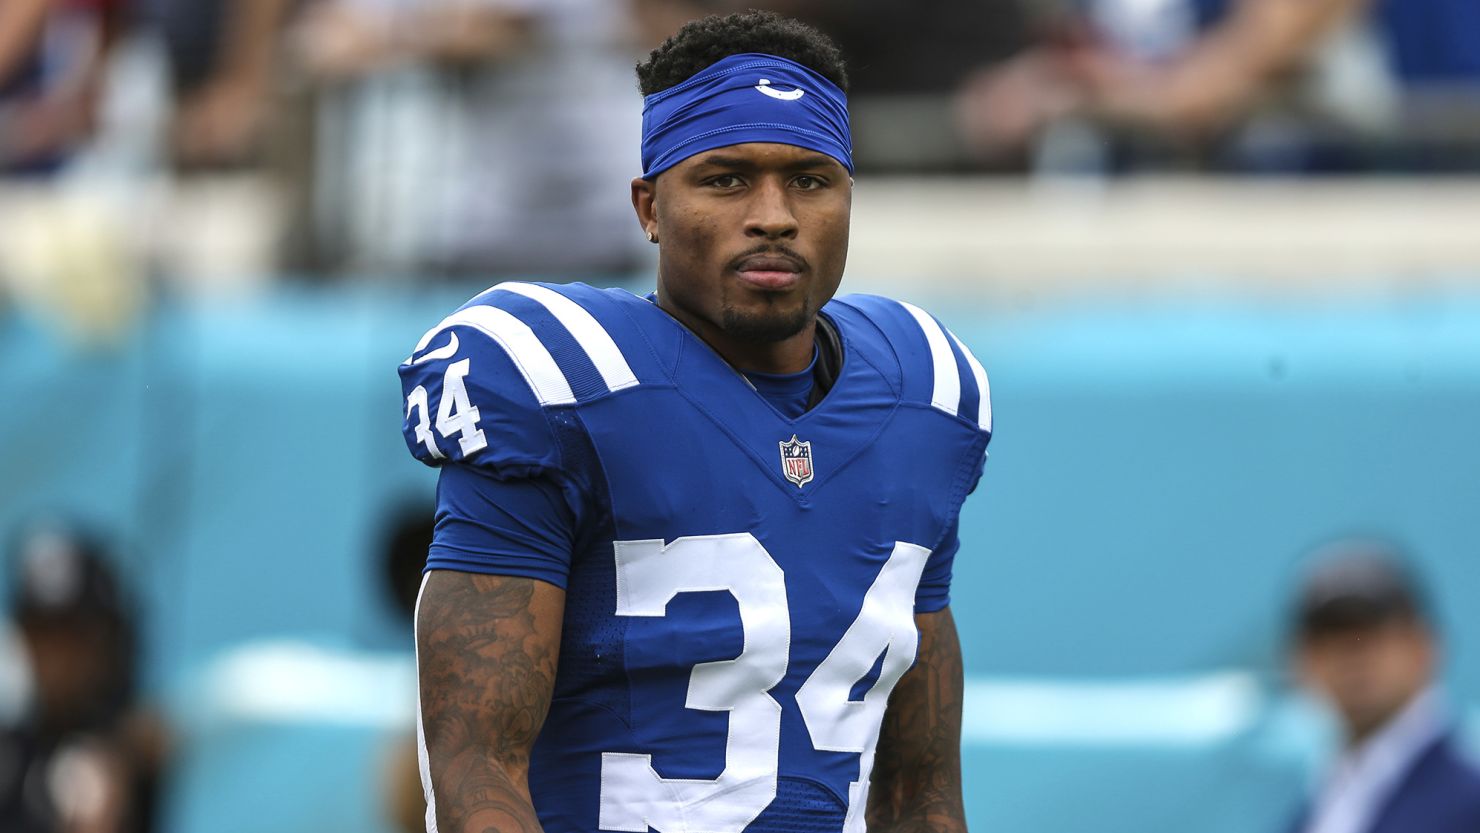 Indianapolis Colts cornerback Isaiah Rodgers Sr. during warm-ups before a game against the Jacksonville Jaguars on Sunday, September 18, 2022.